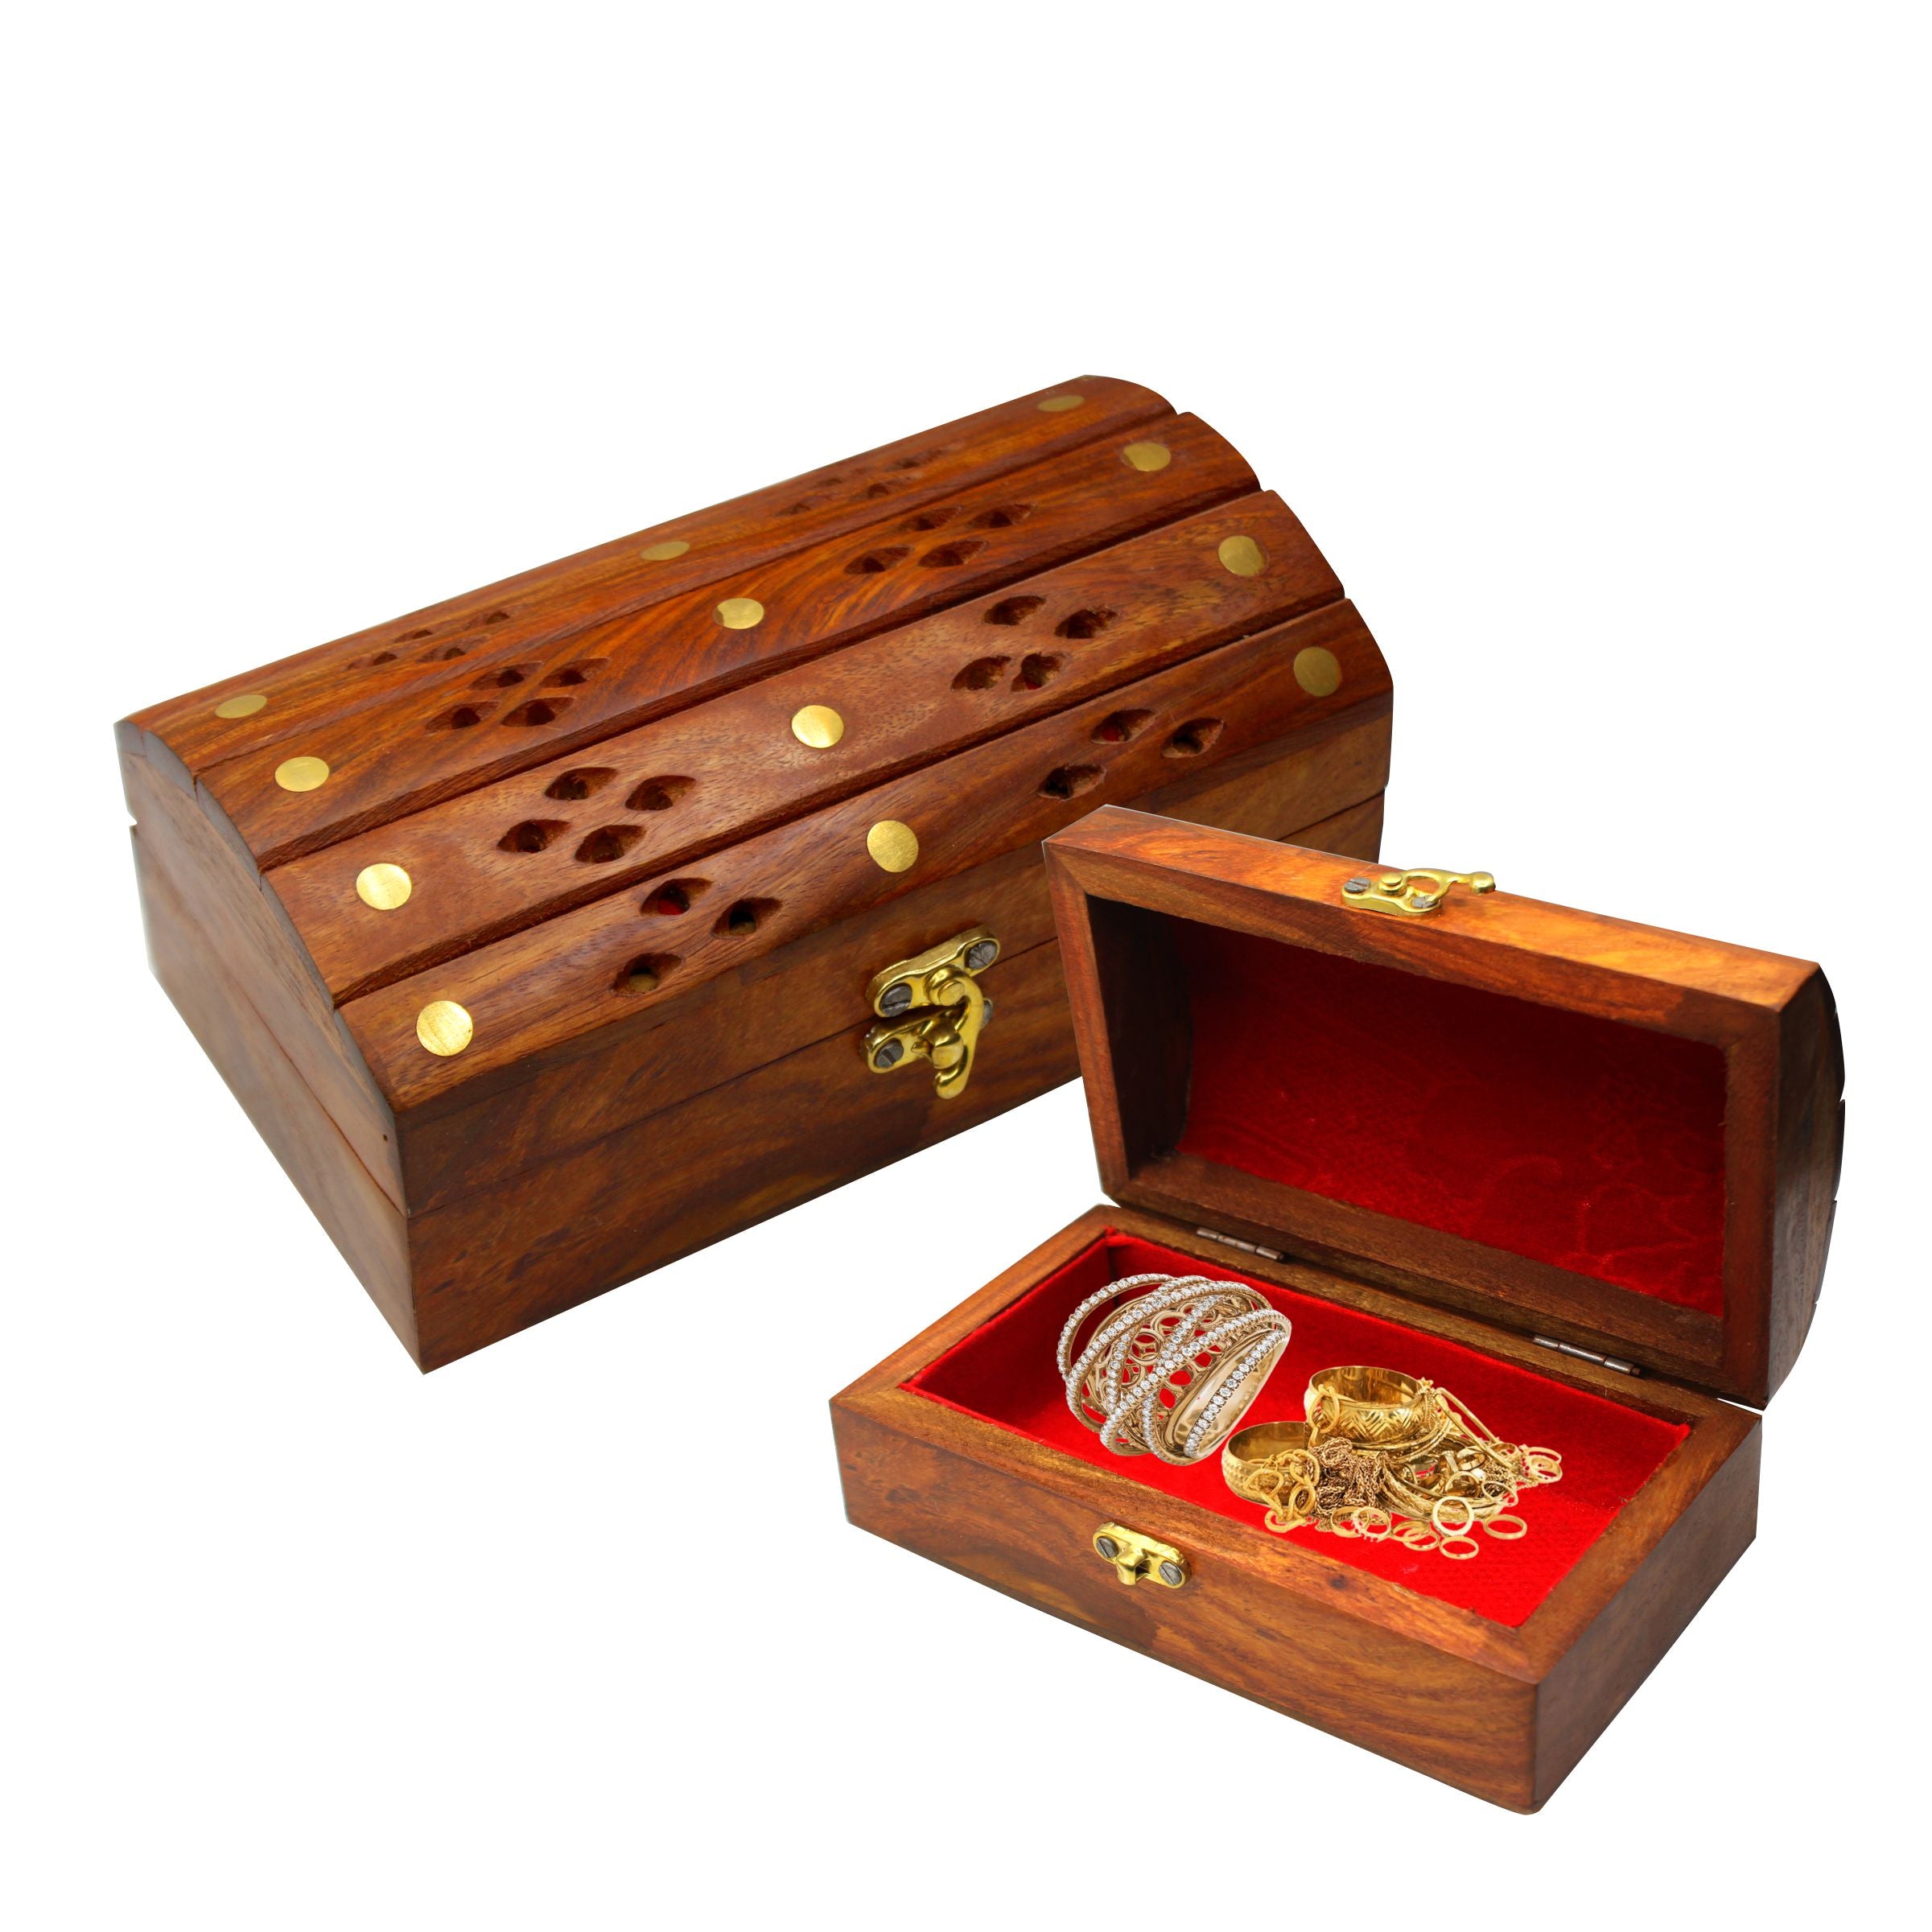 Stylish Wooden Jewelry Box | Antique Hand Made